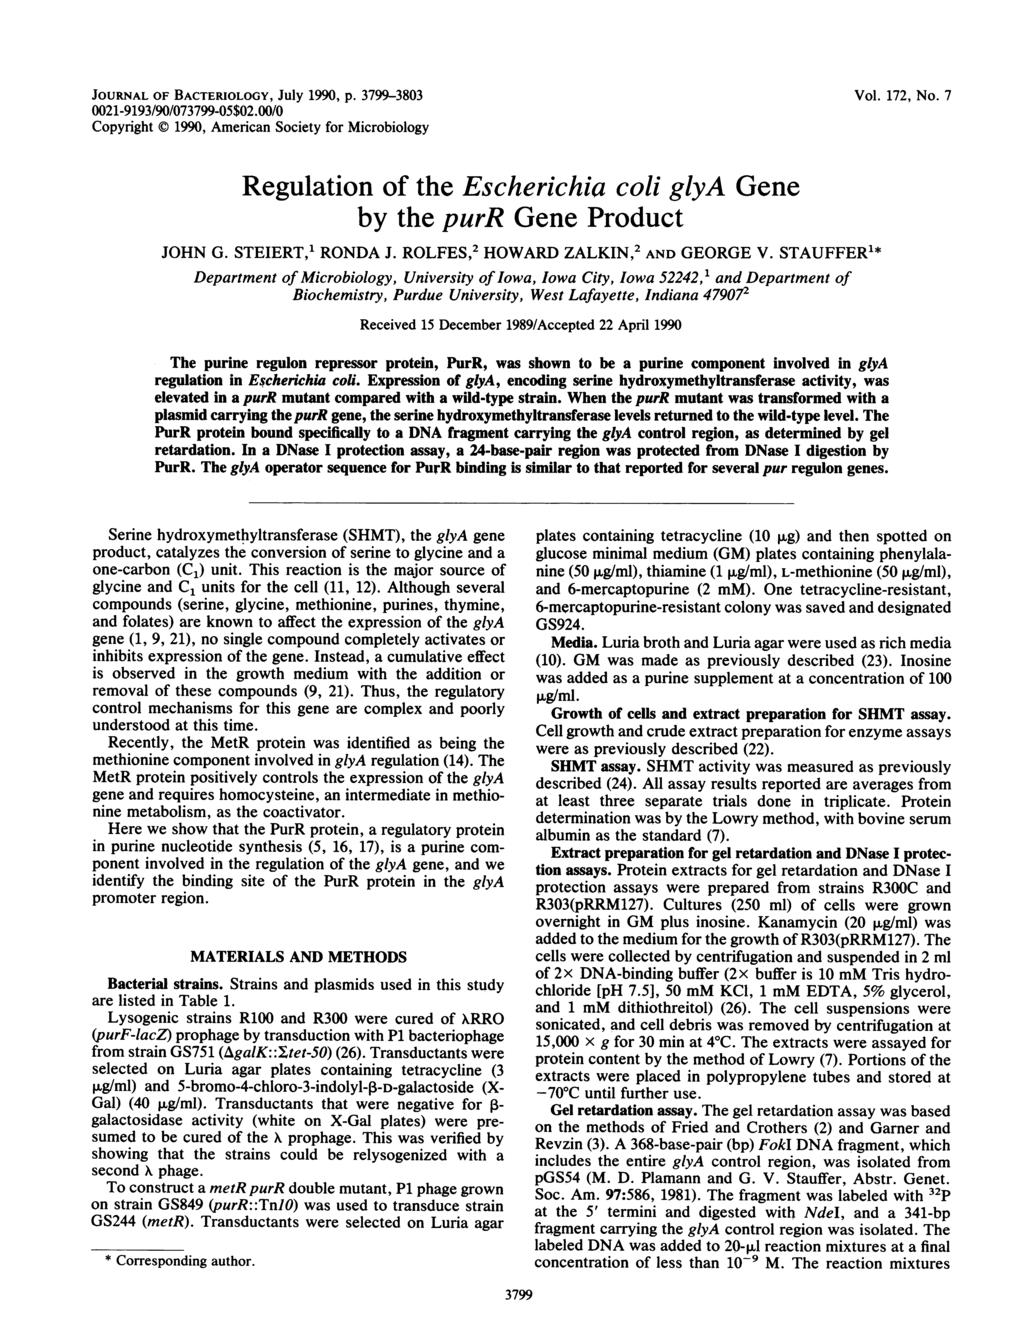 JOURNAL OF BACTERIOLOGY, JUIY 1990, p. 3799-3803 0021-9193/90/073799-05$02.00/0 Copyright 1990, American Society for Microbiology Vol. 172, No.